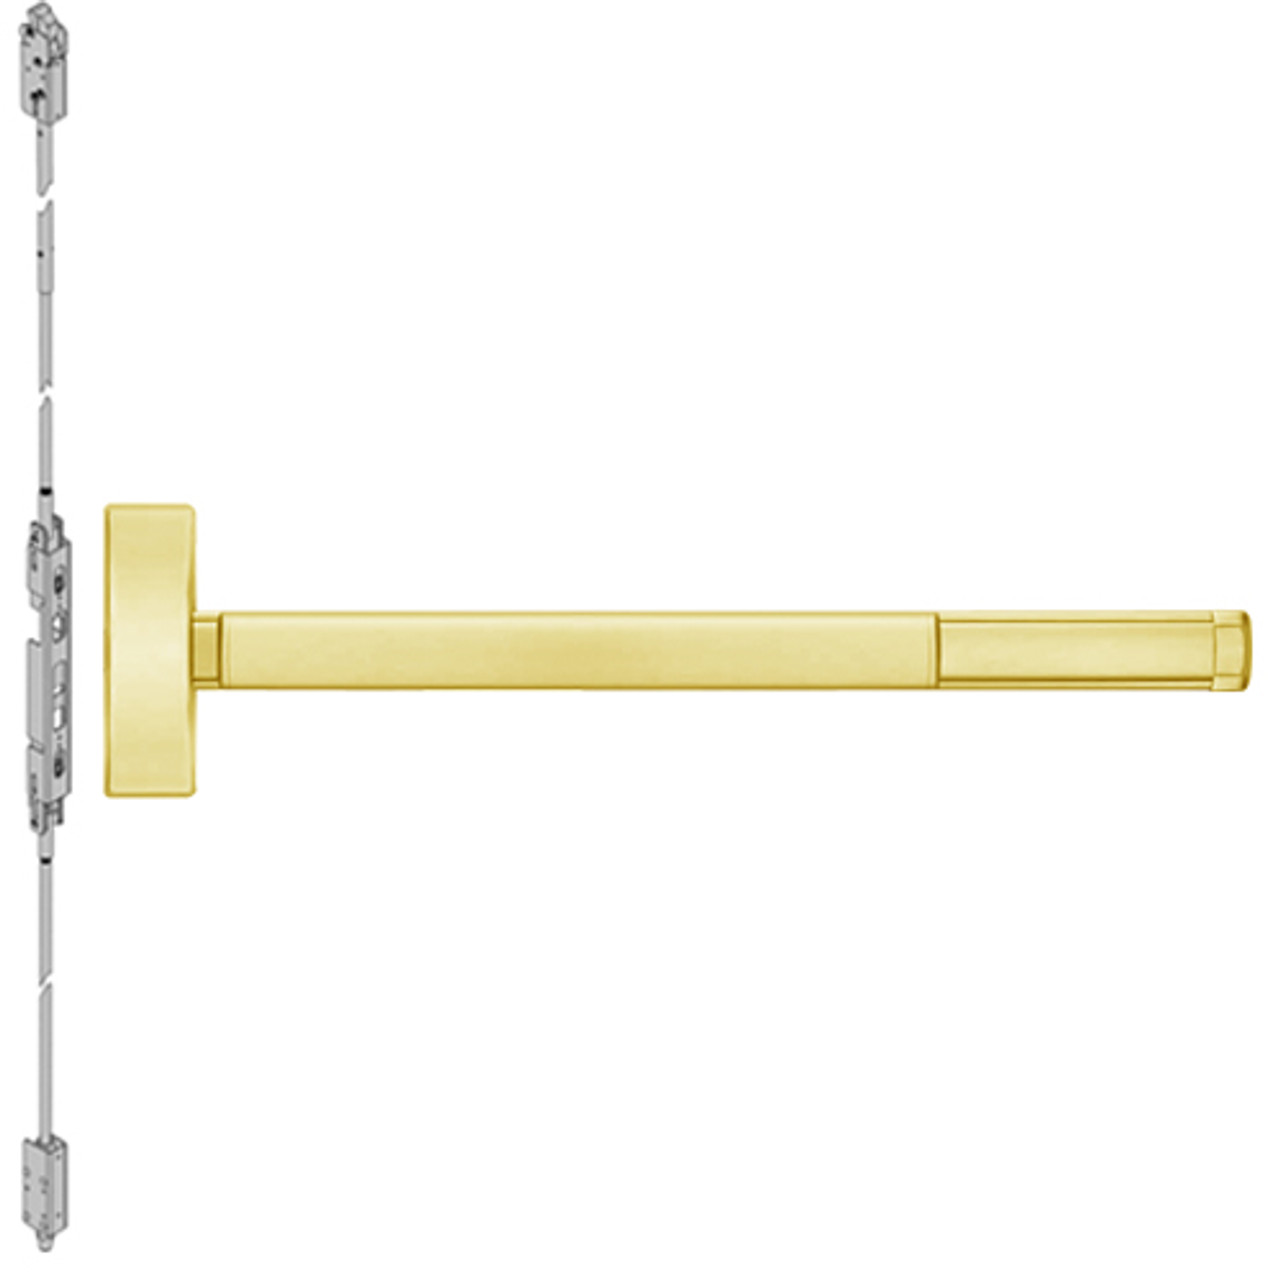 DEFL2808-605-48 PHI 2800 Series Fire Rated Concealed Vertical Rod Exit Device with Delayed Egress Prepped for Key Controls Lever-Knob in Bright Brass Finish